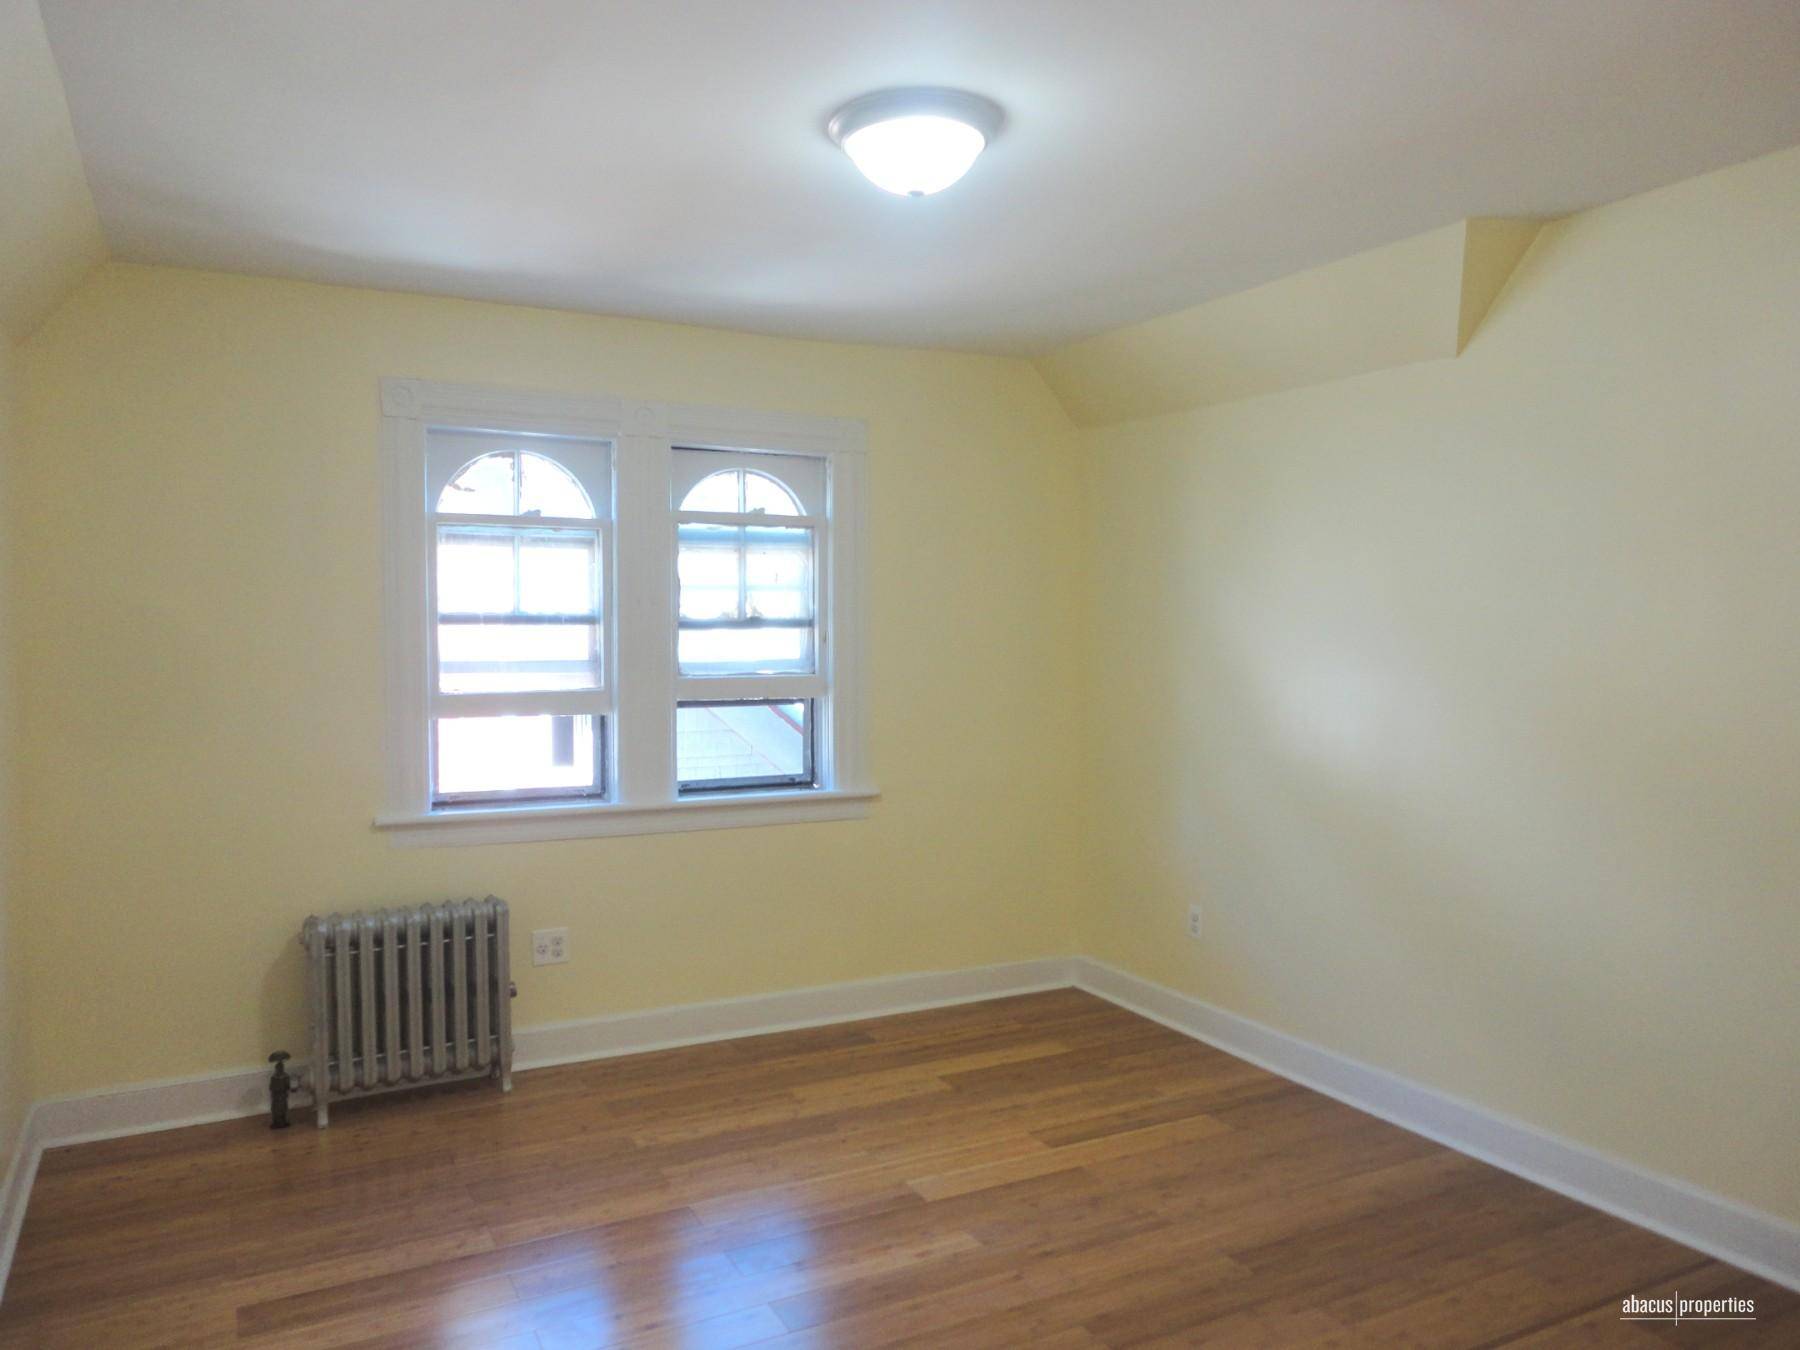 Bright amp ; Spacious 2. 5 bedroom apartment in a prime Ditmas Park multi family home.